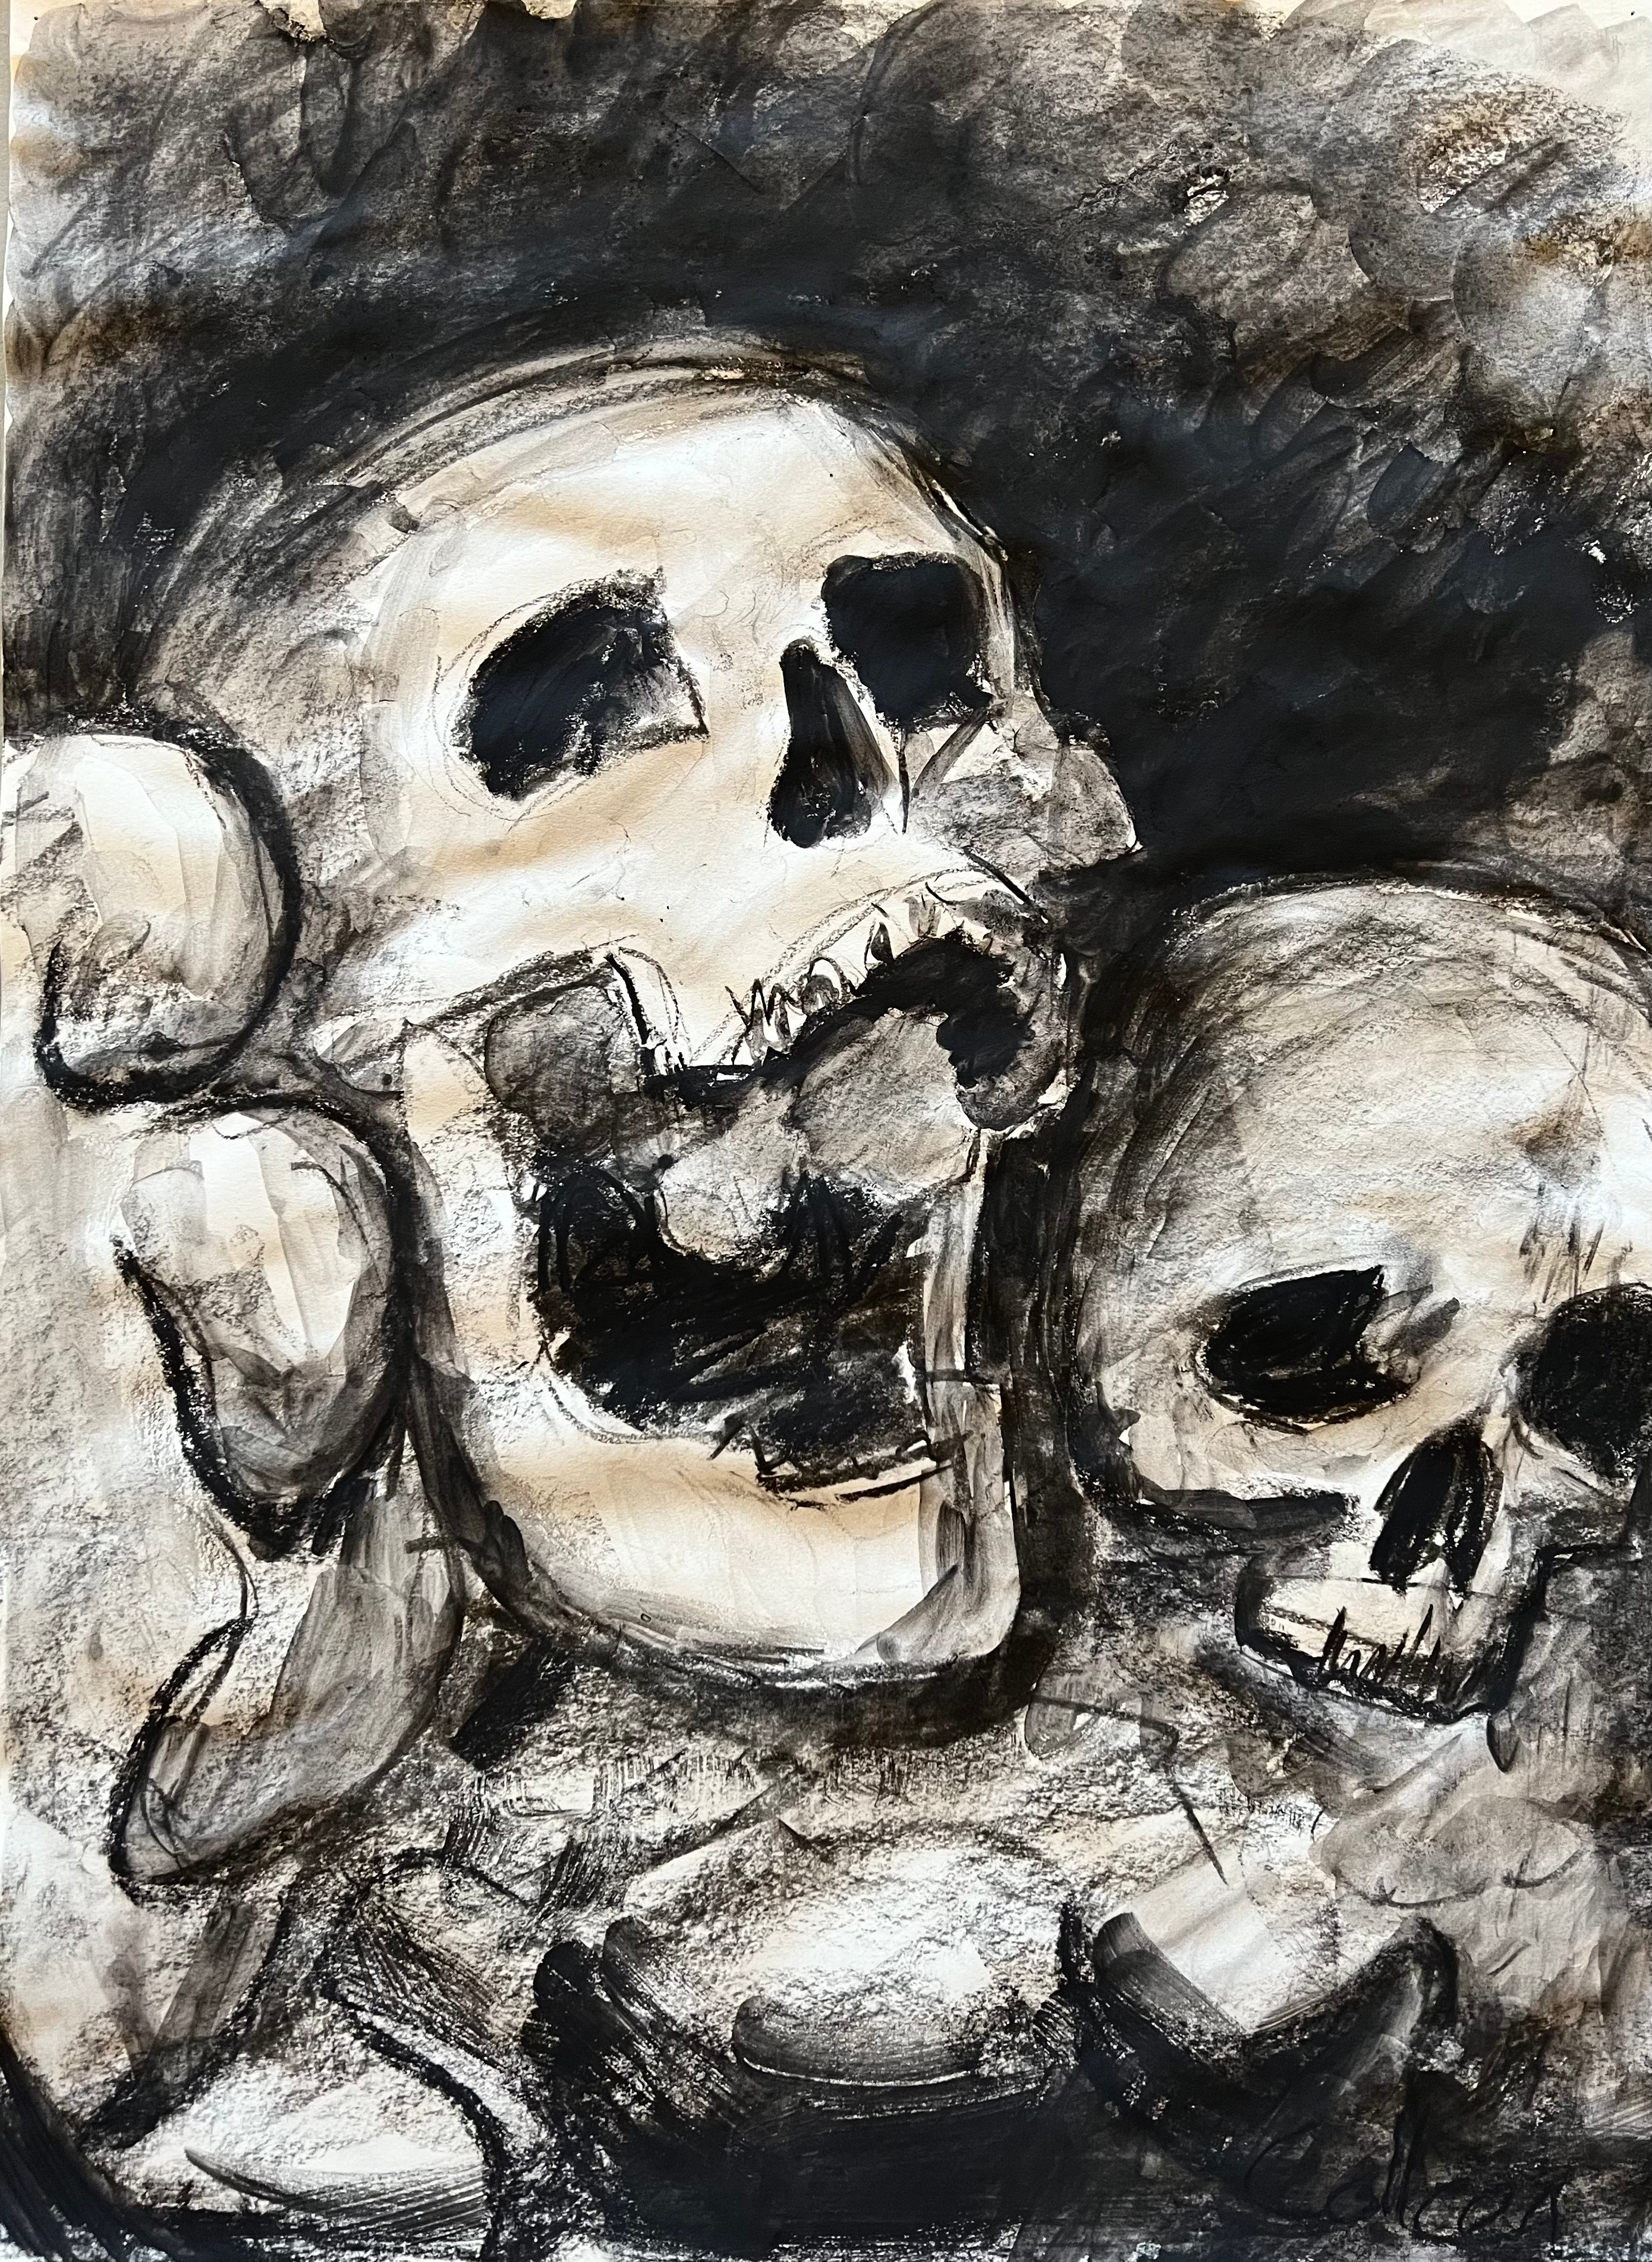 A sketch in charcoal later brushed over with water, inspired by the Paris Catacombs. 
Time: 15 minutes